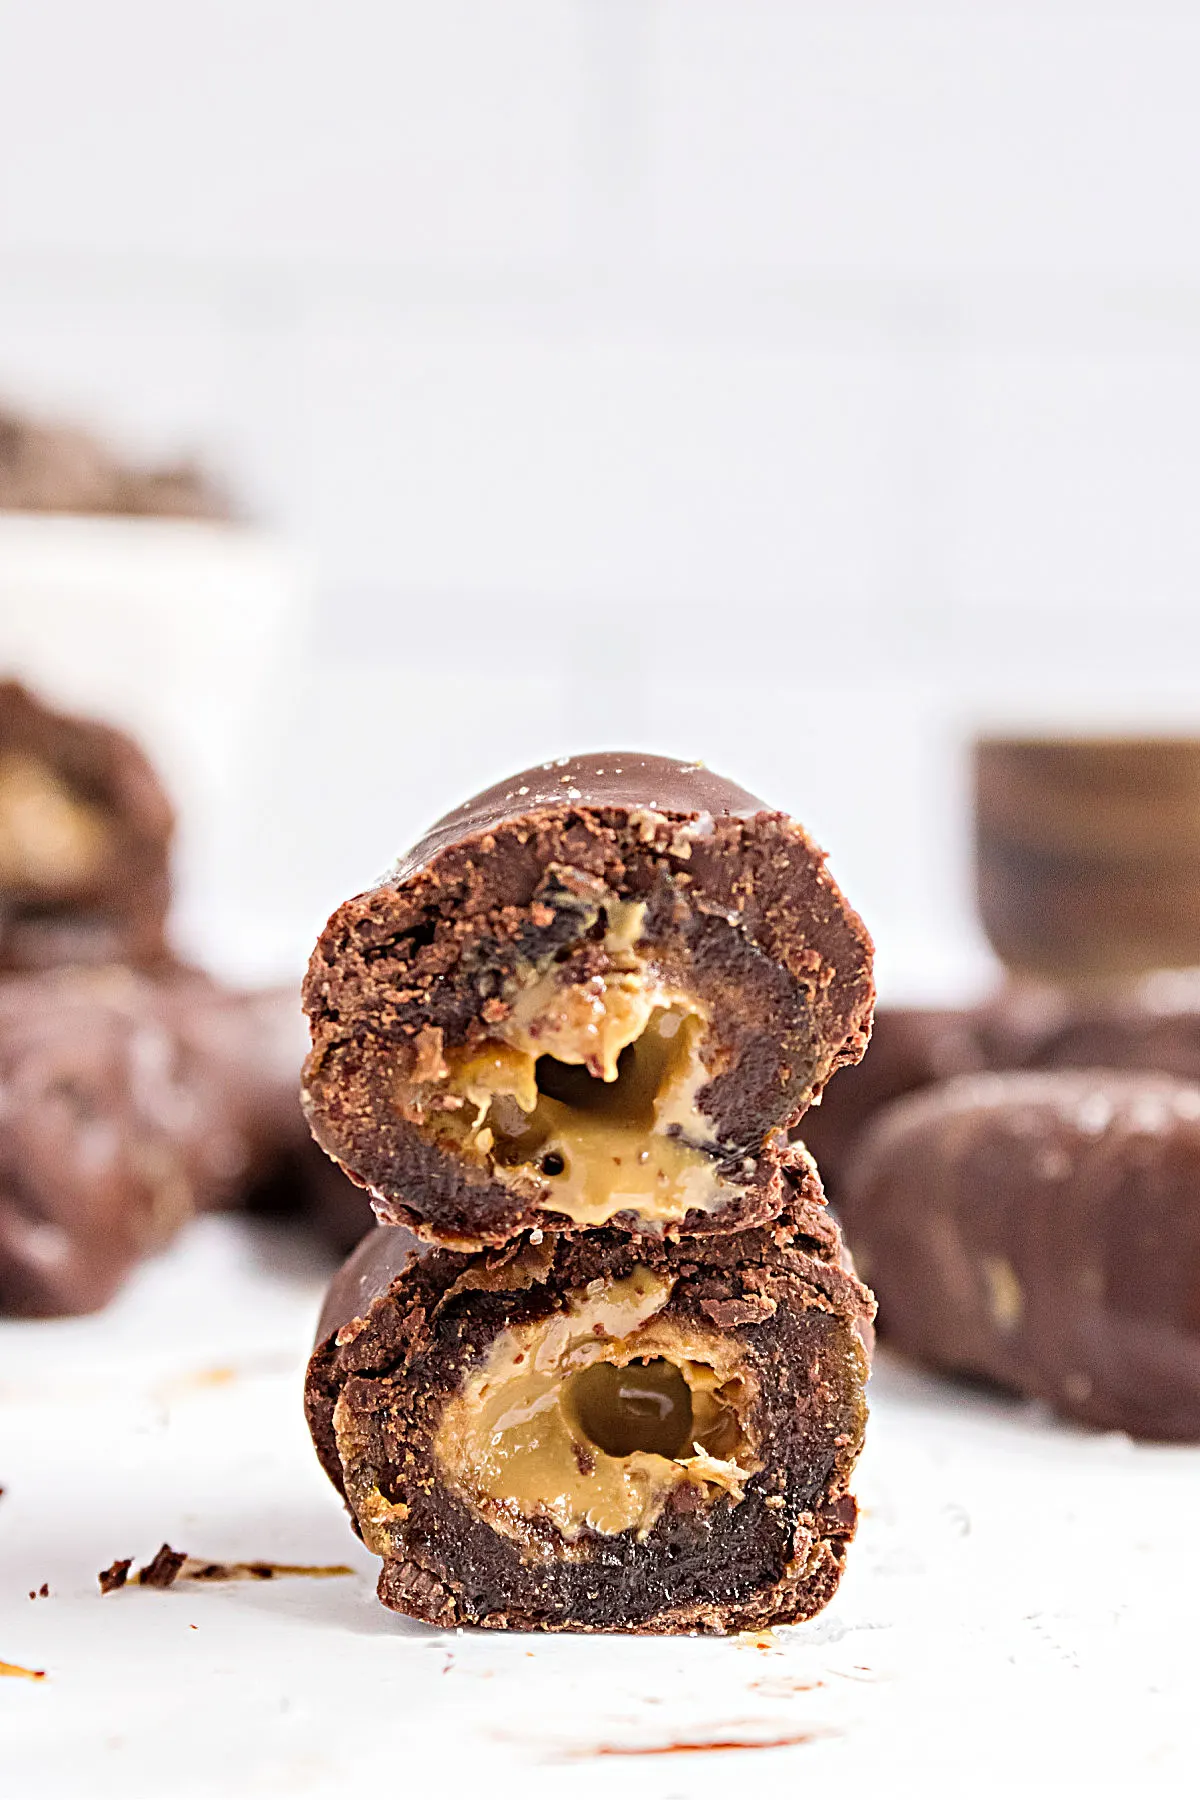 Chocolate covered date with peanut butter cut in half to reveal filling.